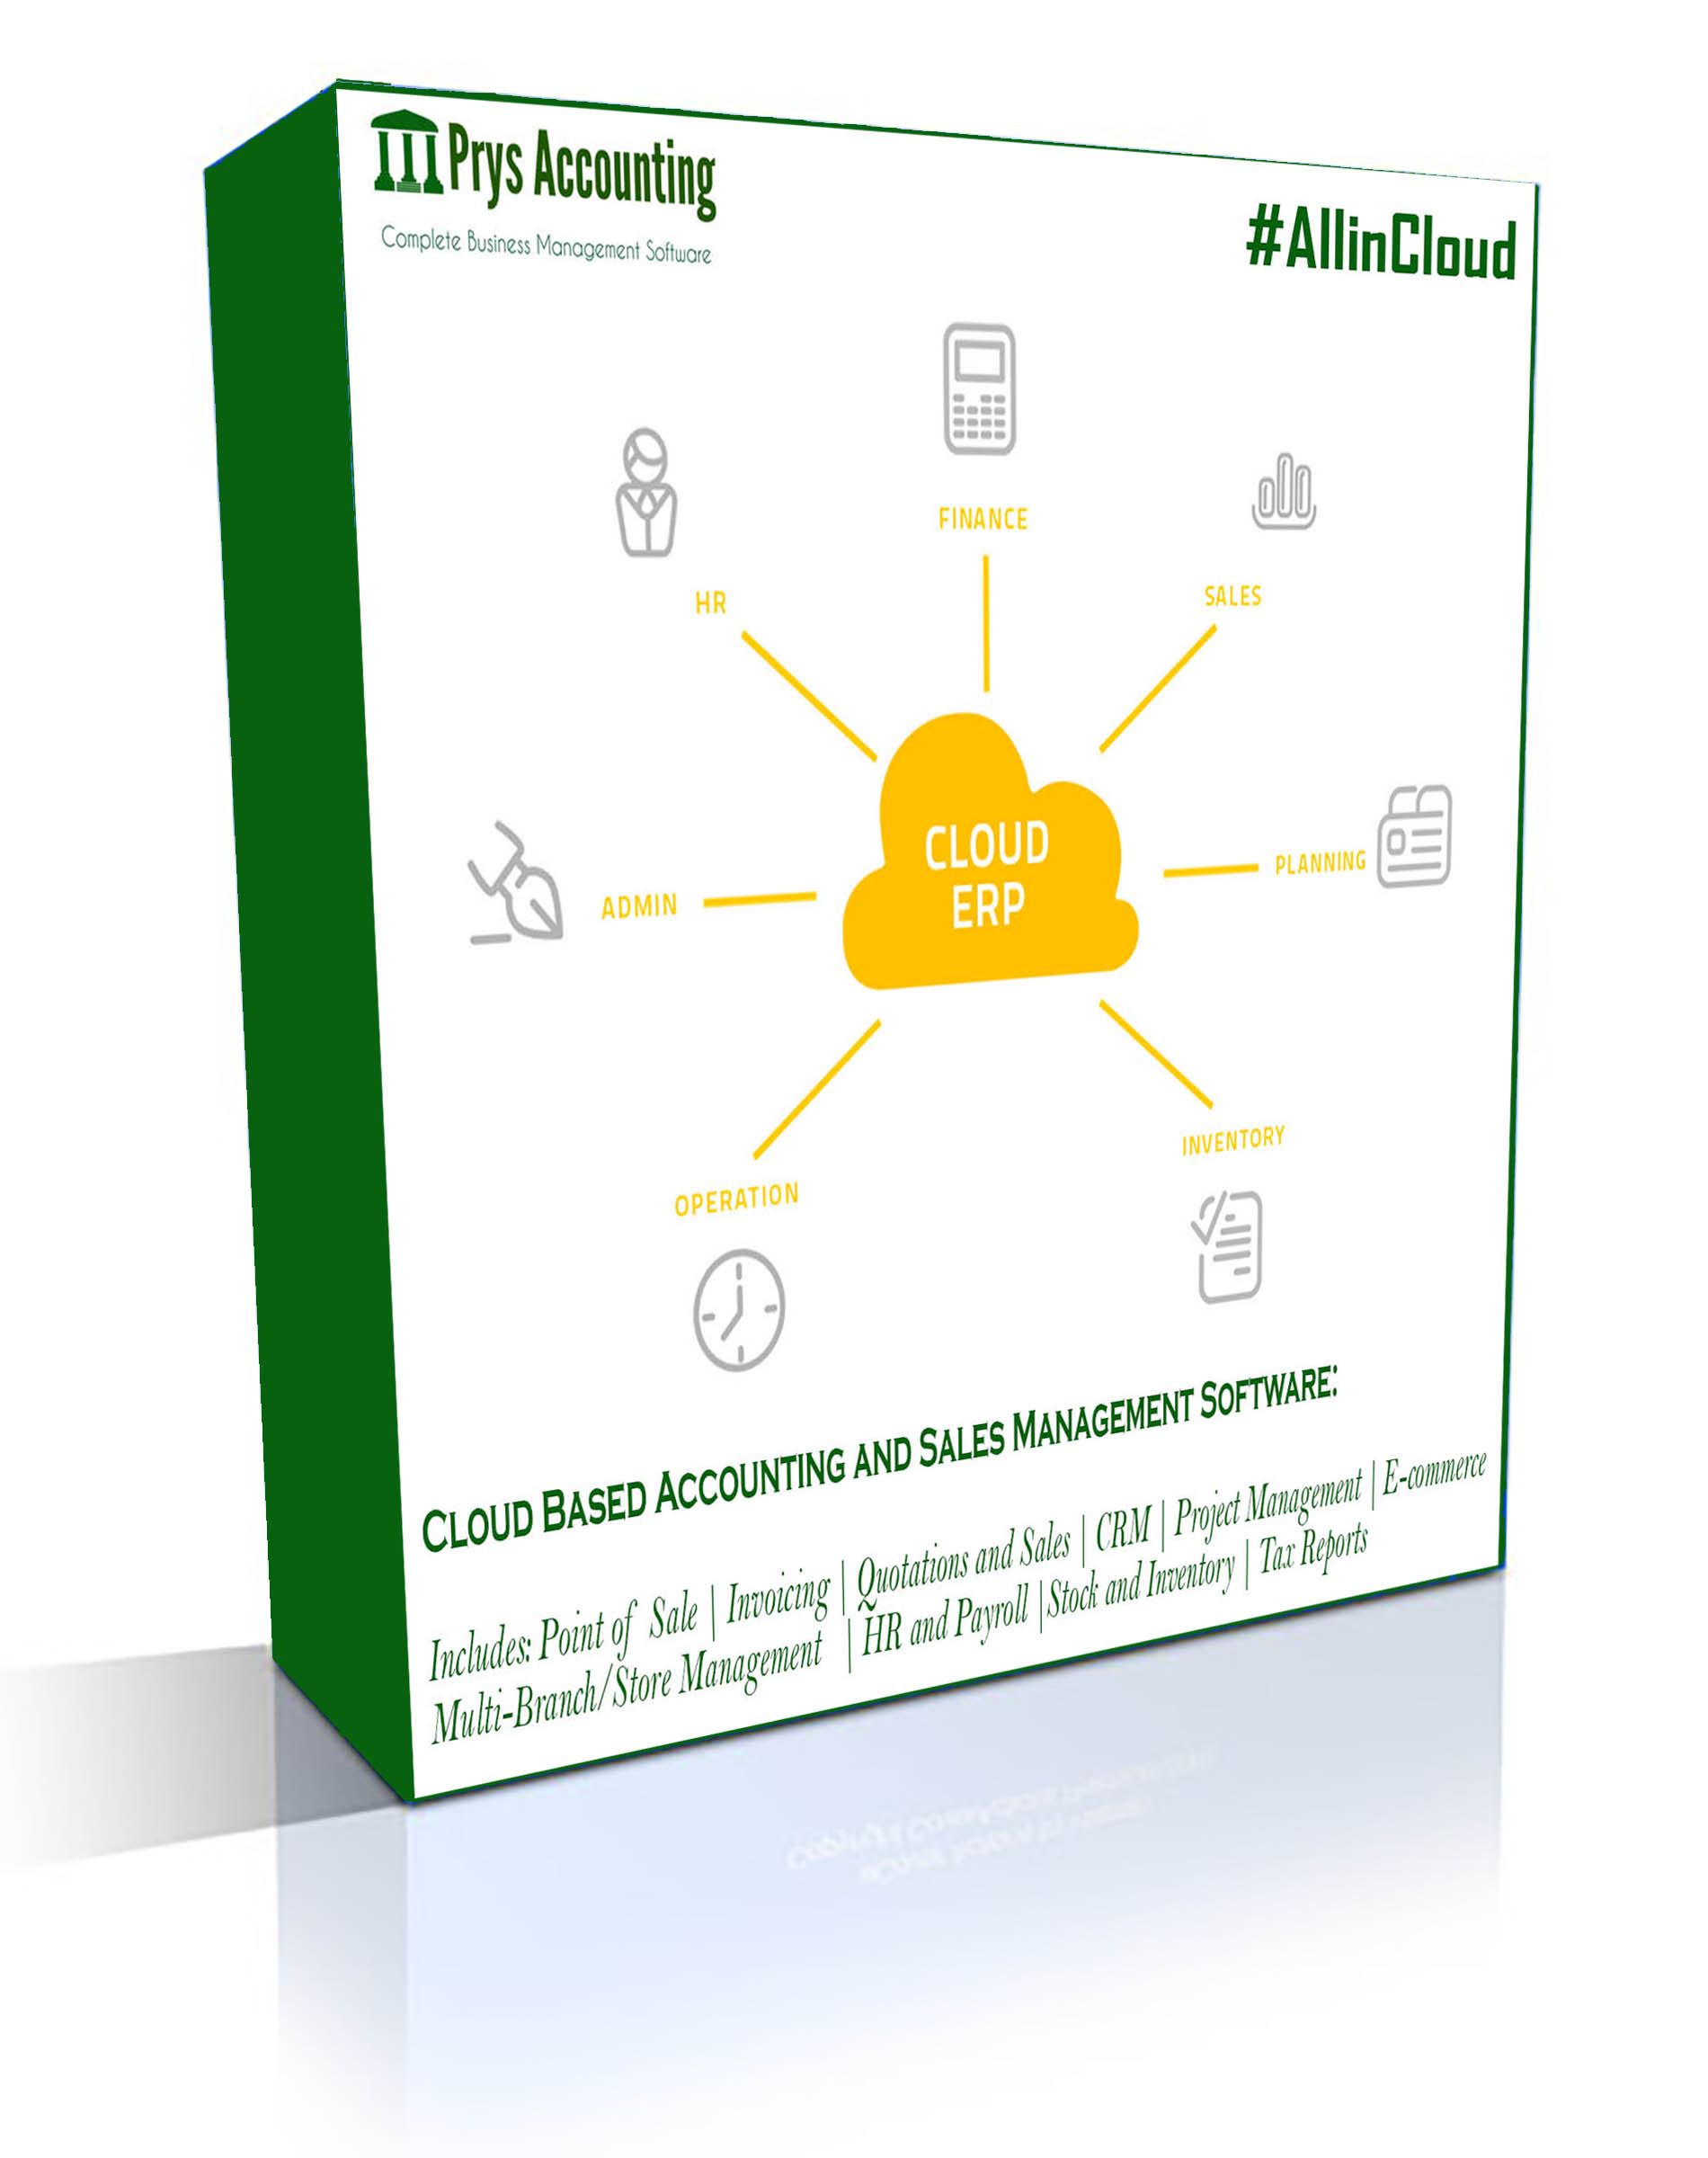 Cloud based accounting, invoicing, sales, Human Resources and business management Software  - Annual Subscrition #AllinCloud